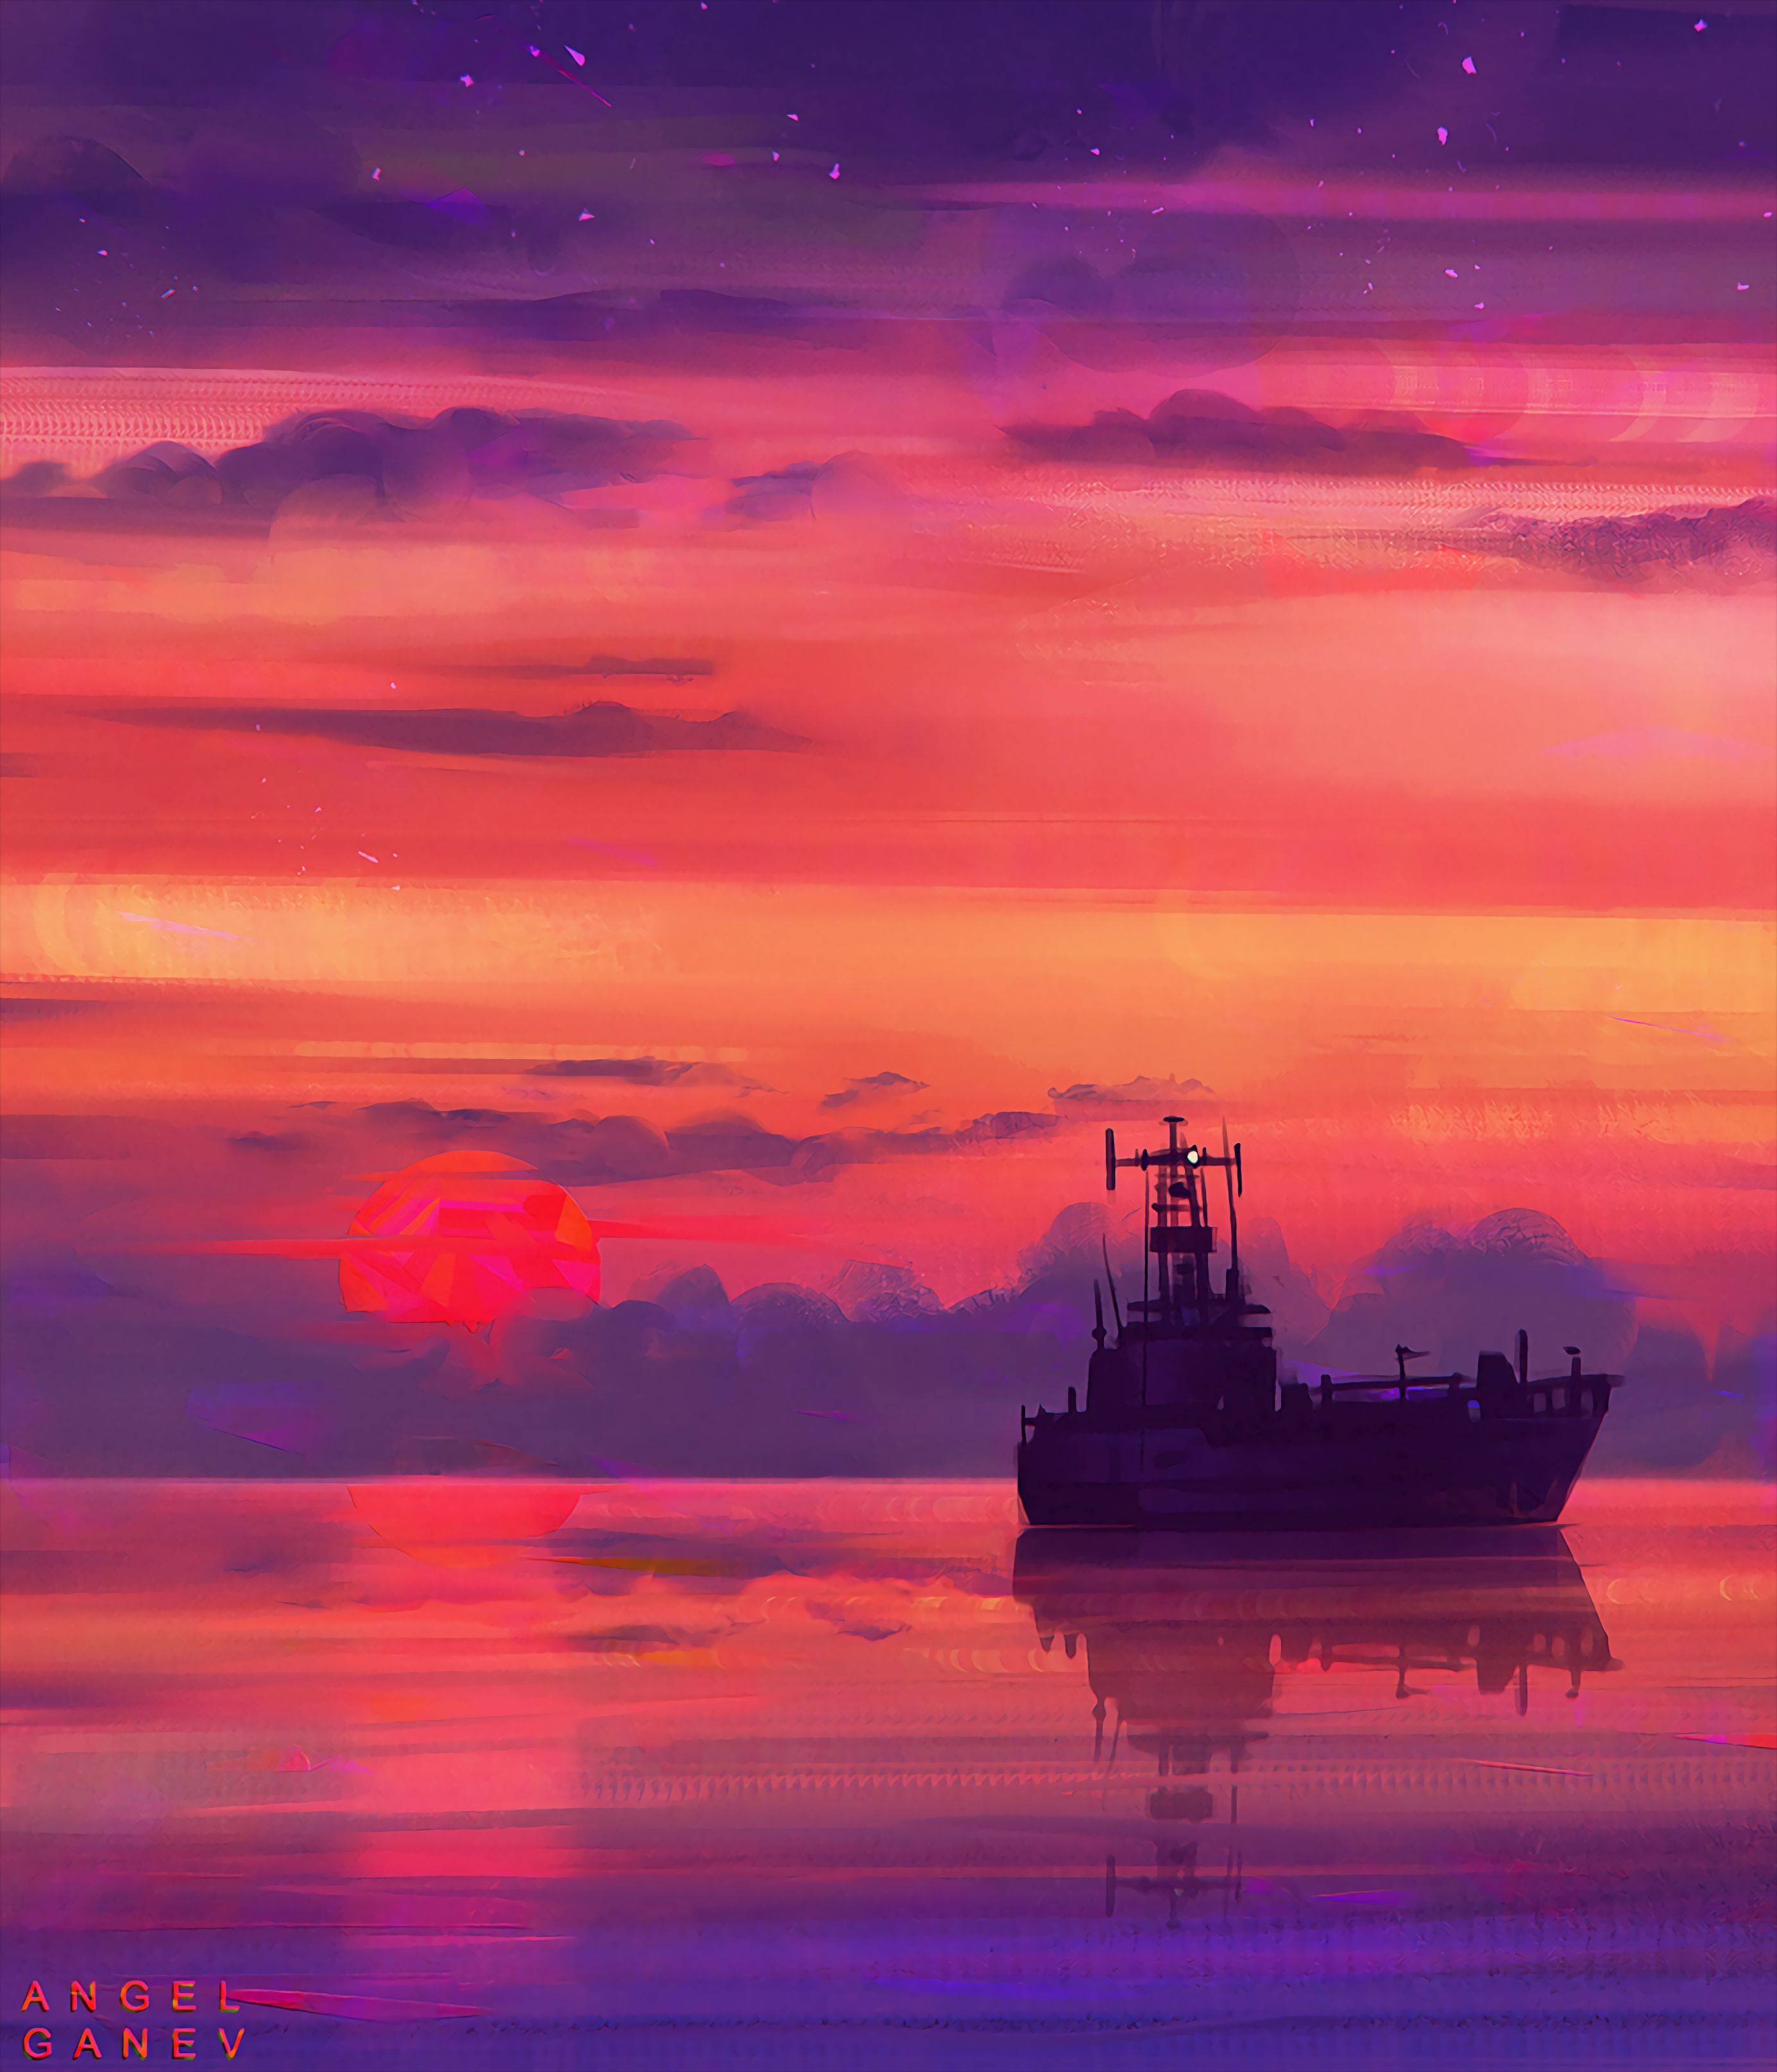 106436 download wallpaper sunset, sky, art, sea, clouds, horizon, ship screensavers and pictures for free